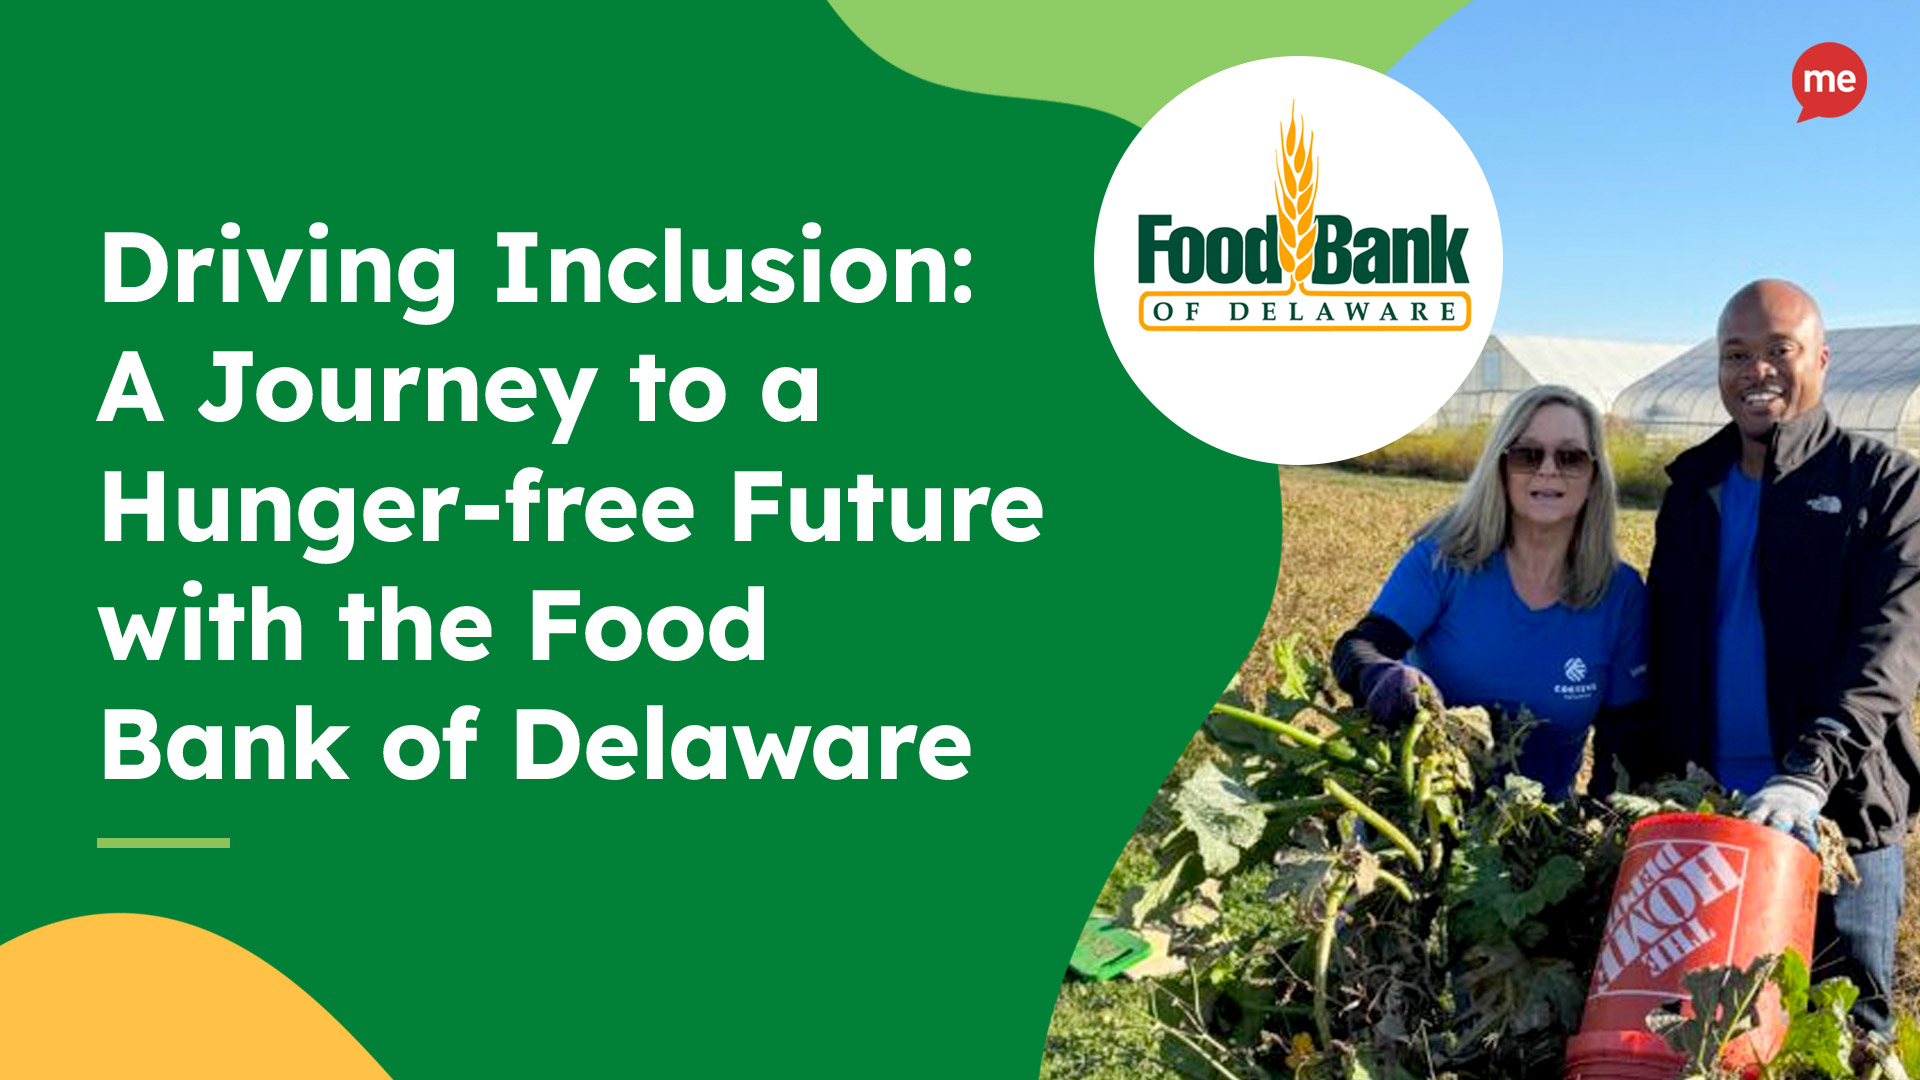 Driving Inclusion: A Journey to a Hunger-free Future with the Food Bank of Delaware with an image of a woman and man smiling while in a field picking leaves of food